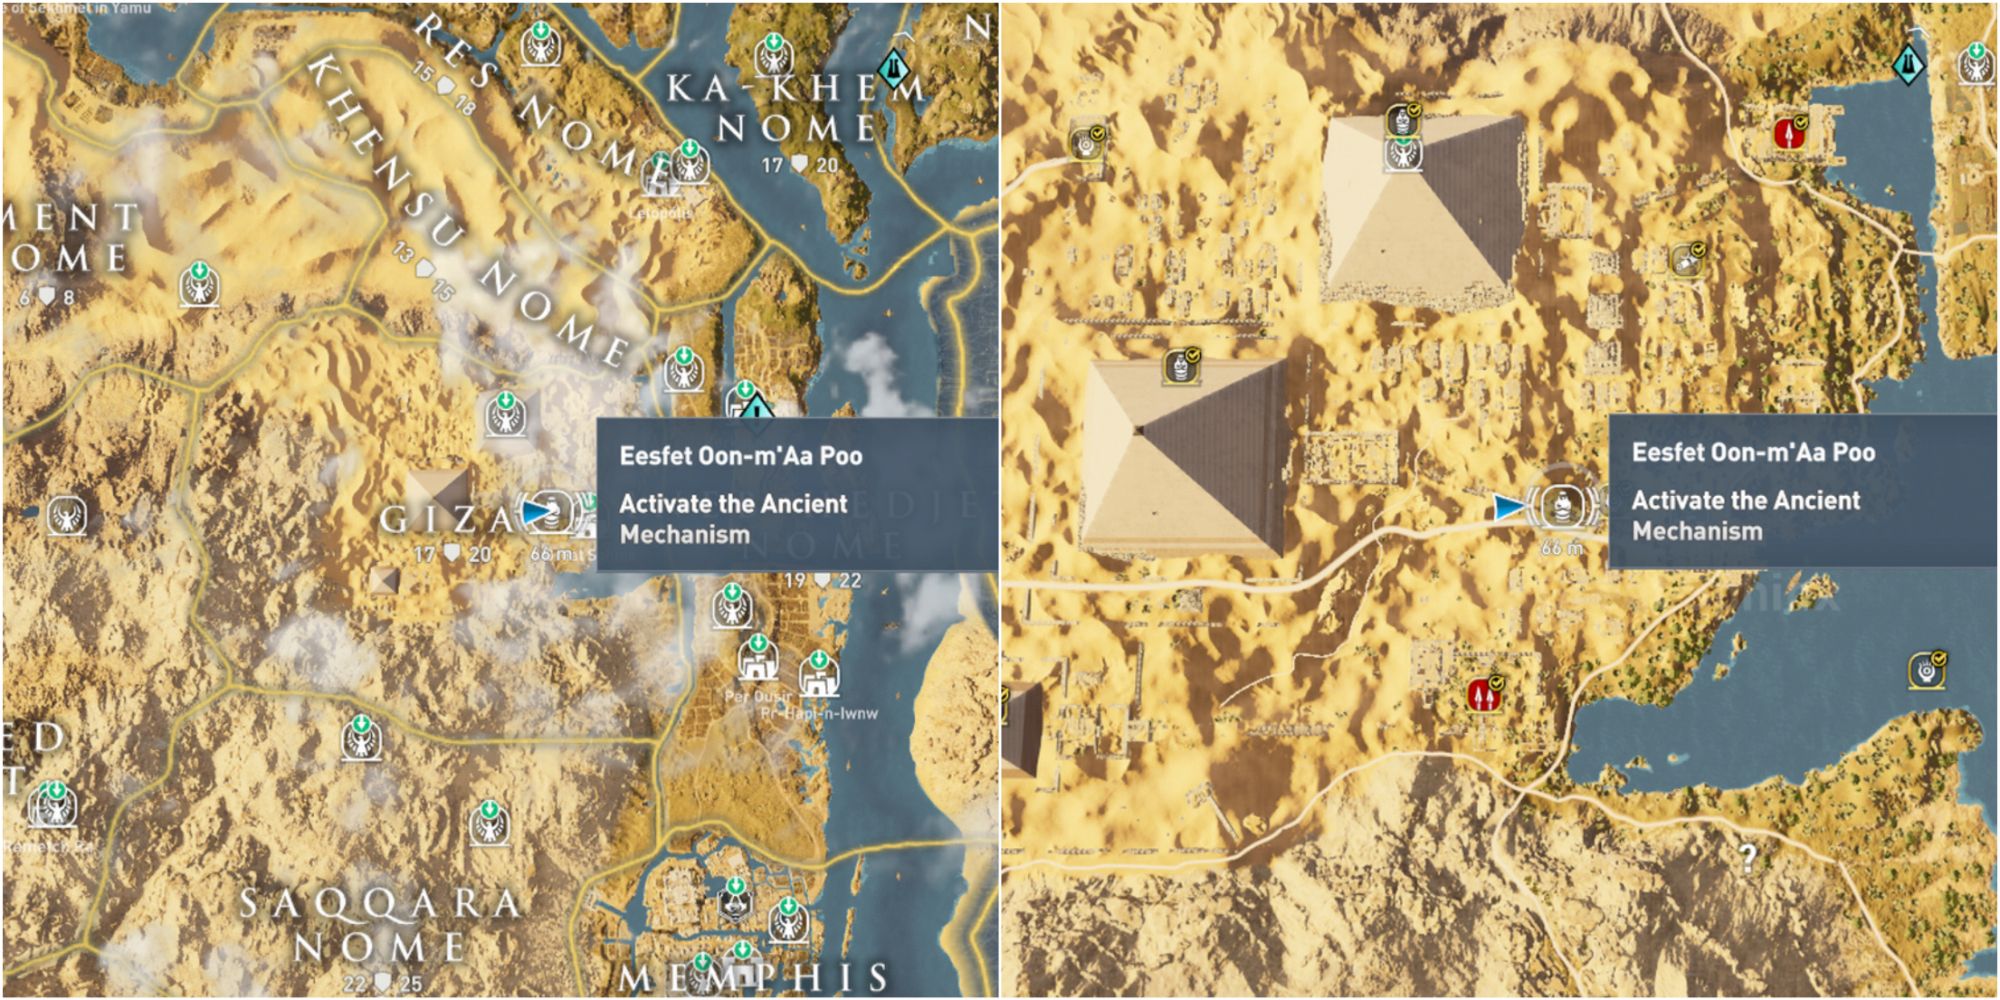 Where To Find All Tombs In Assassin's Creed Origins